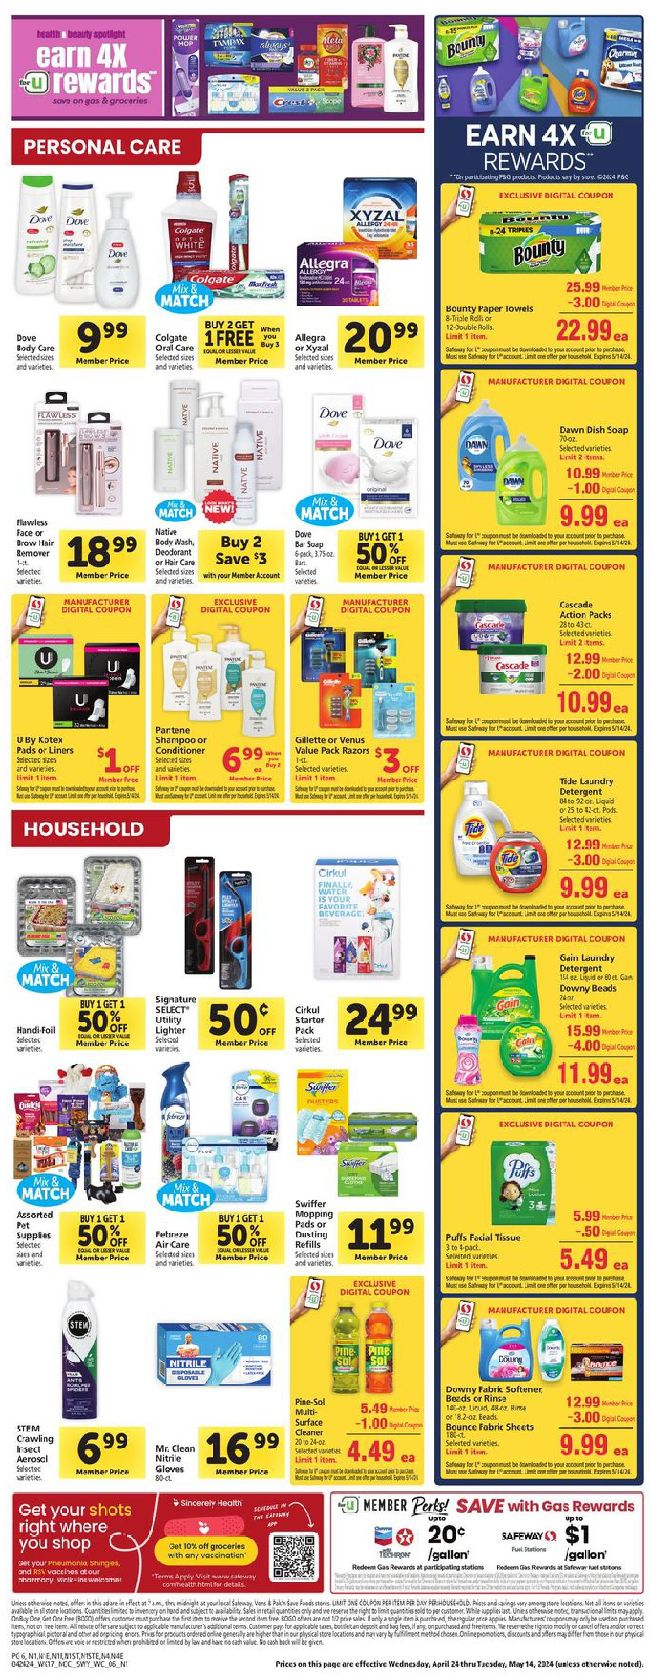 Safeway Weekly Ad Preview 24_April_24 Page 6